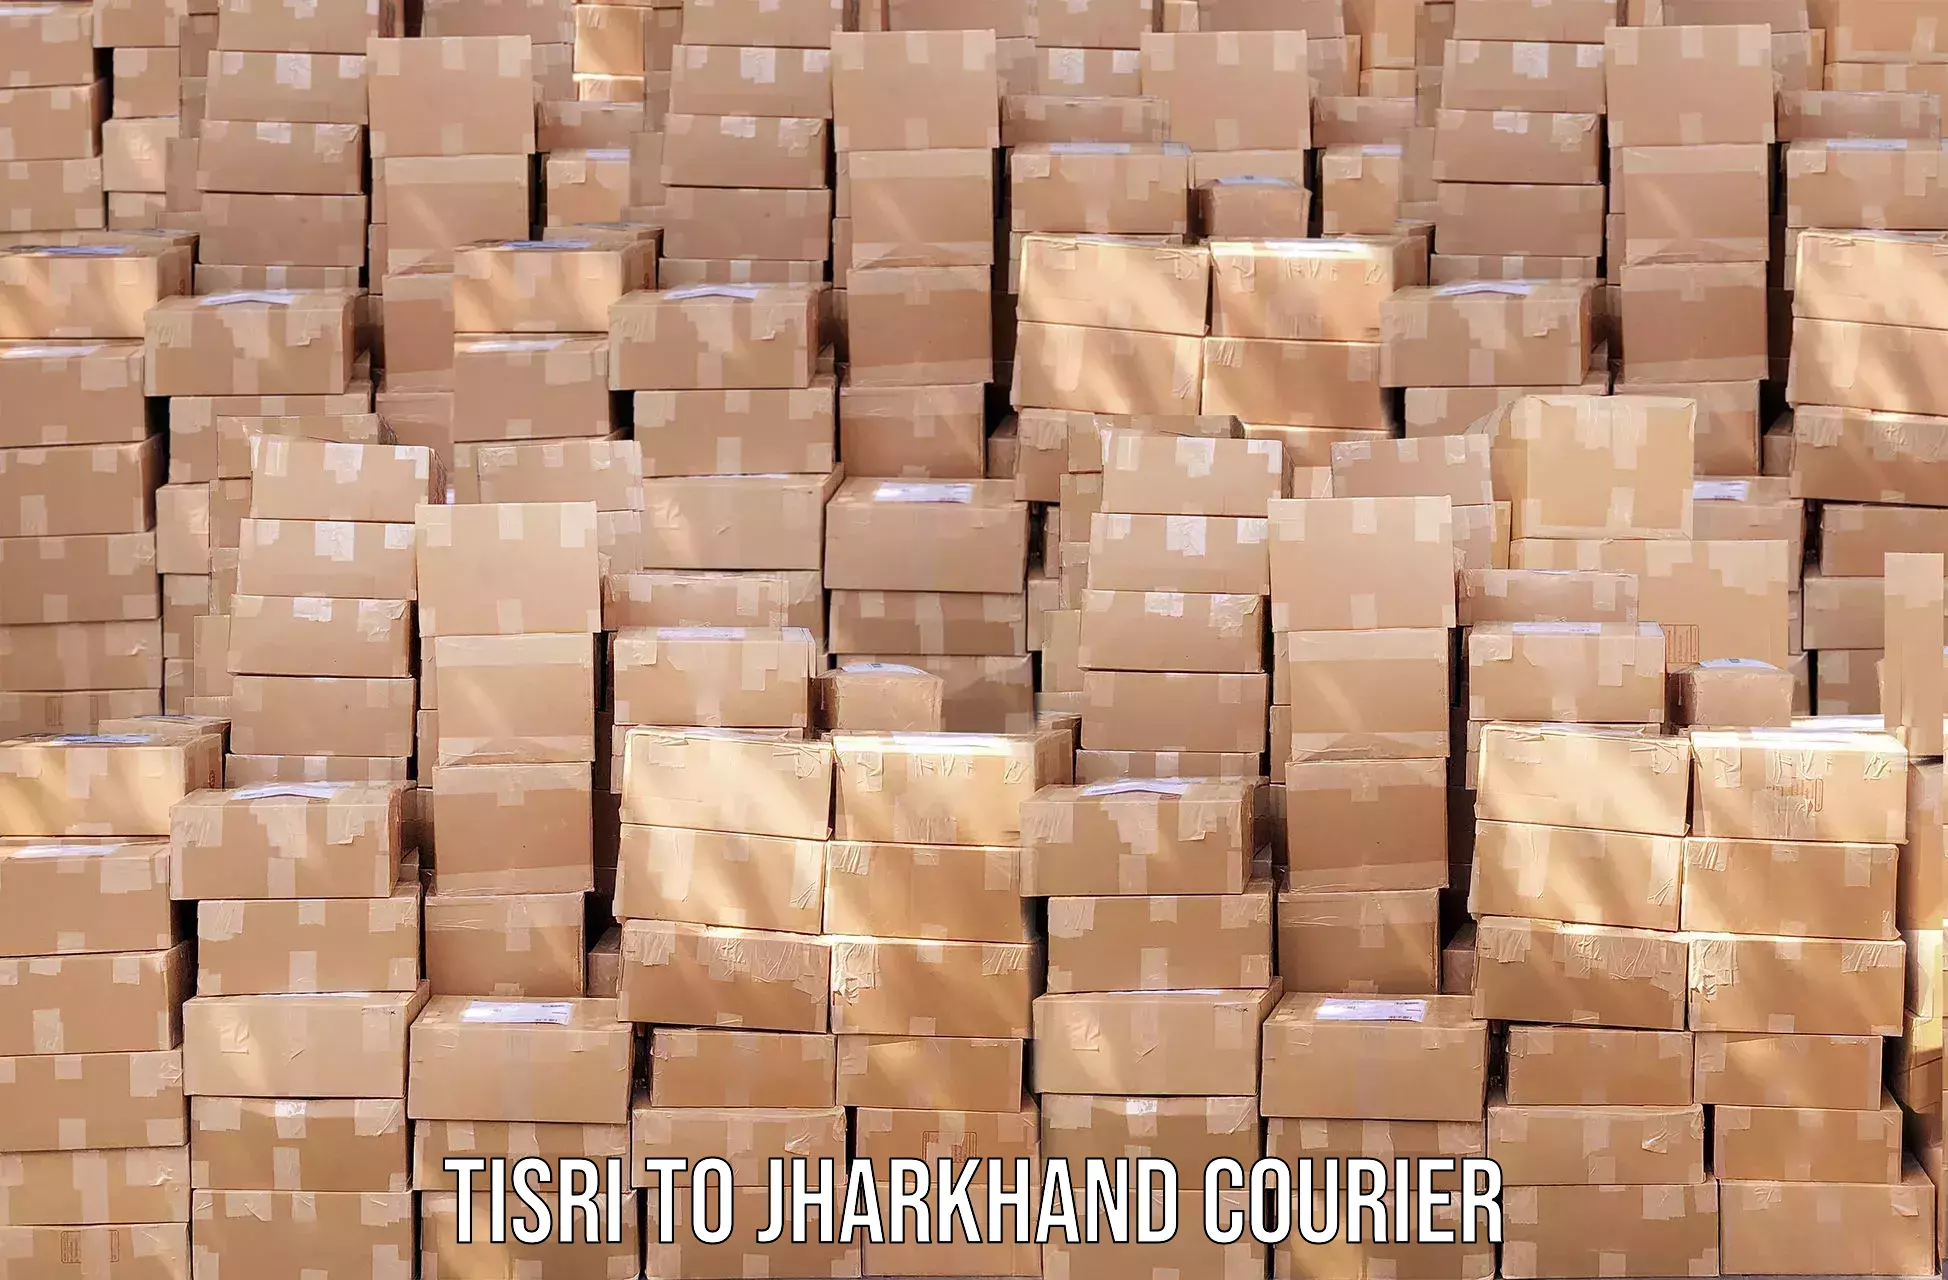 Courier service booking Tisri to Ormanjhi